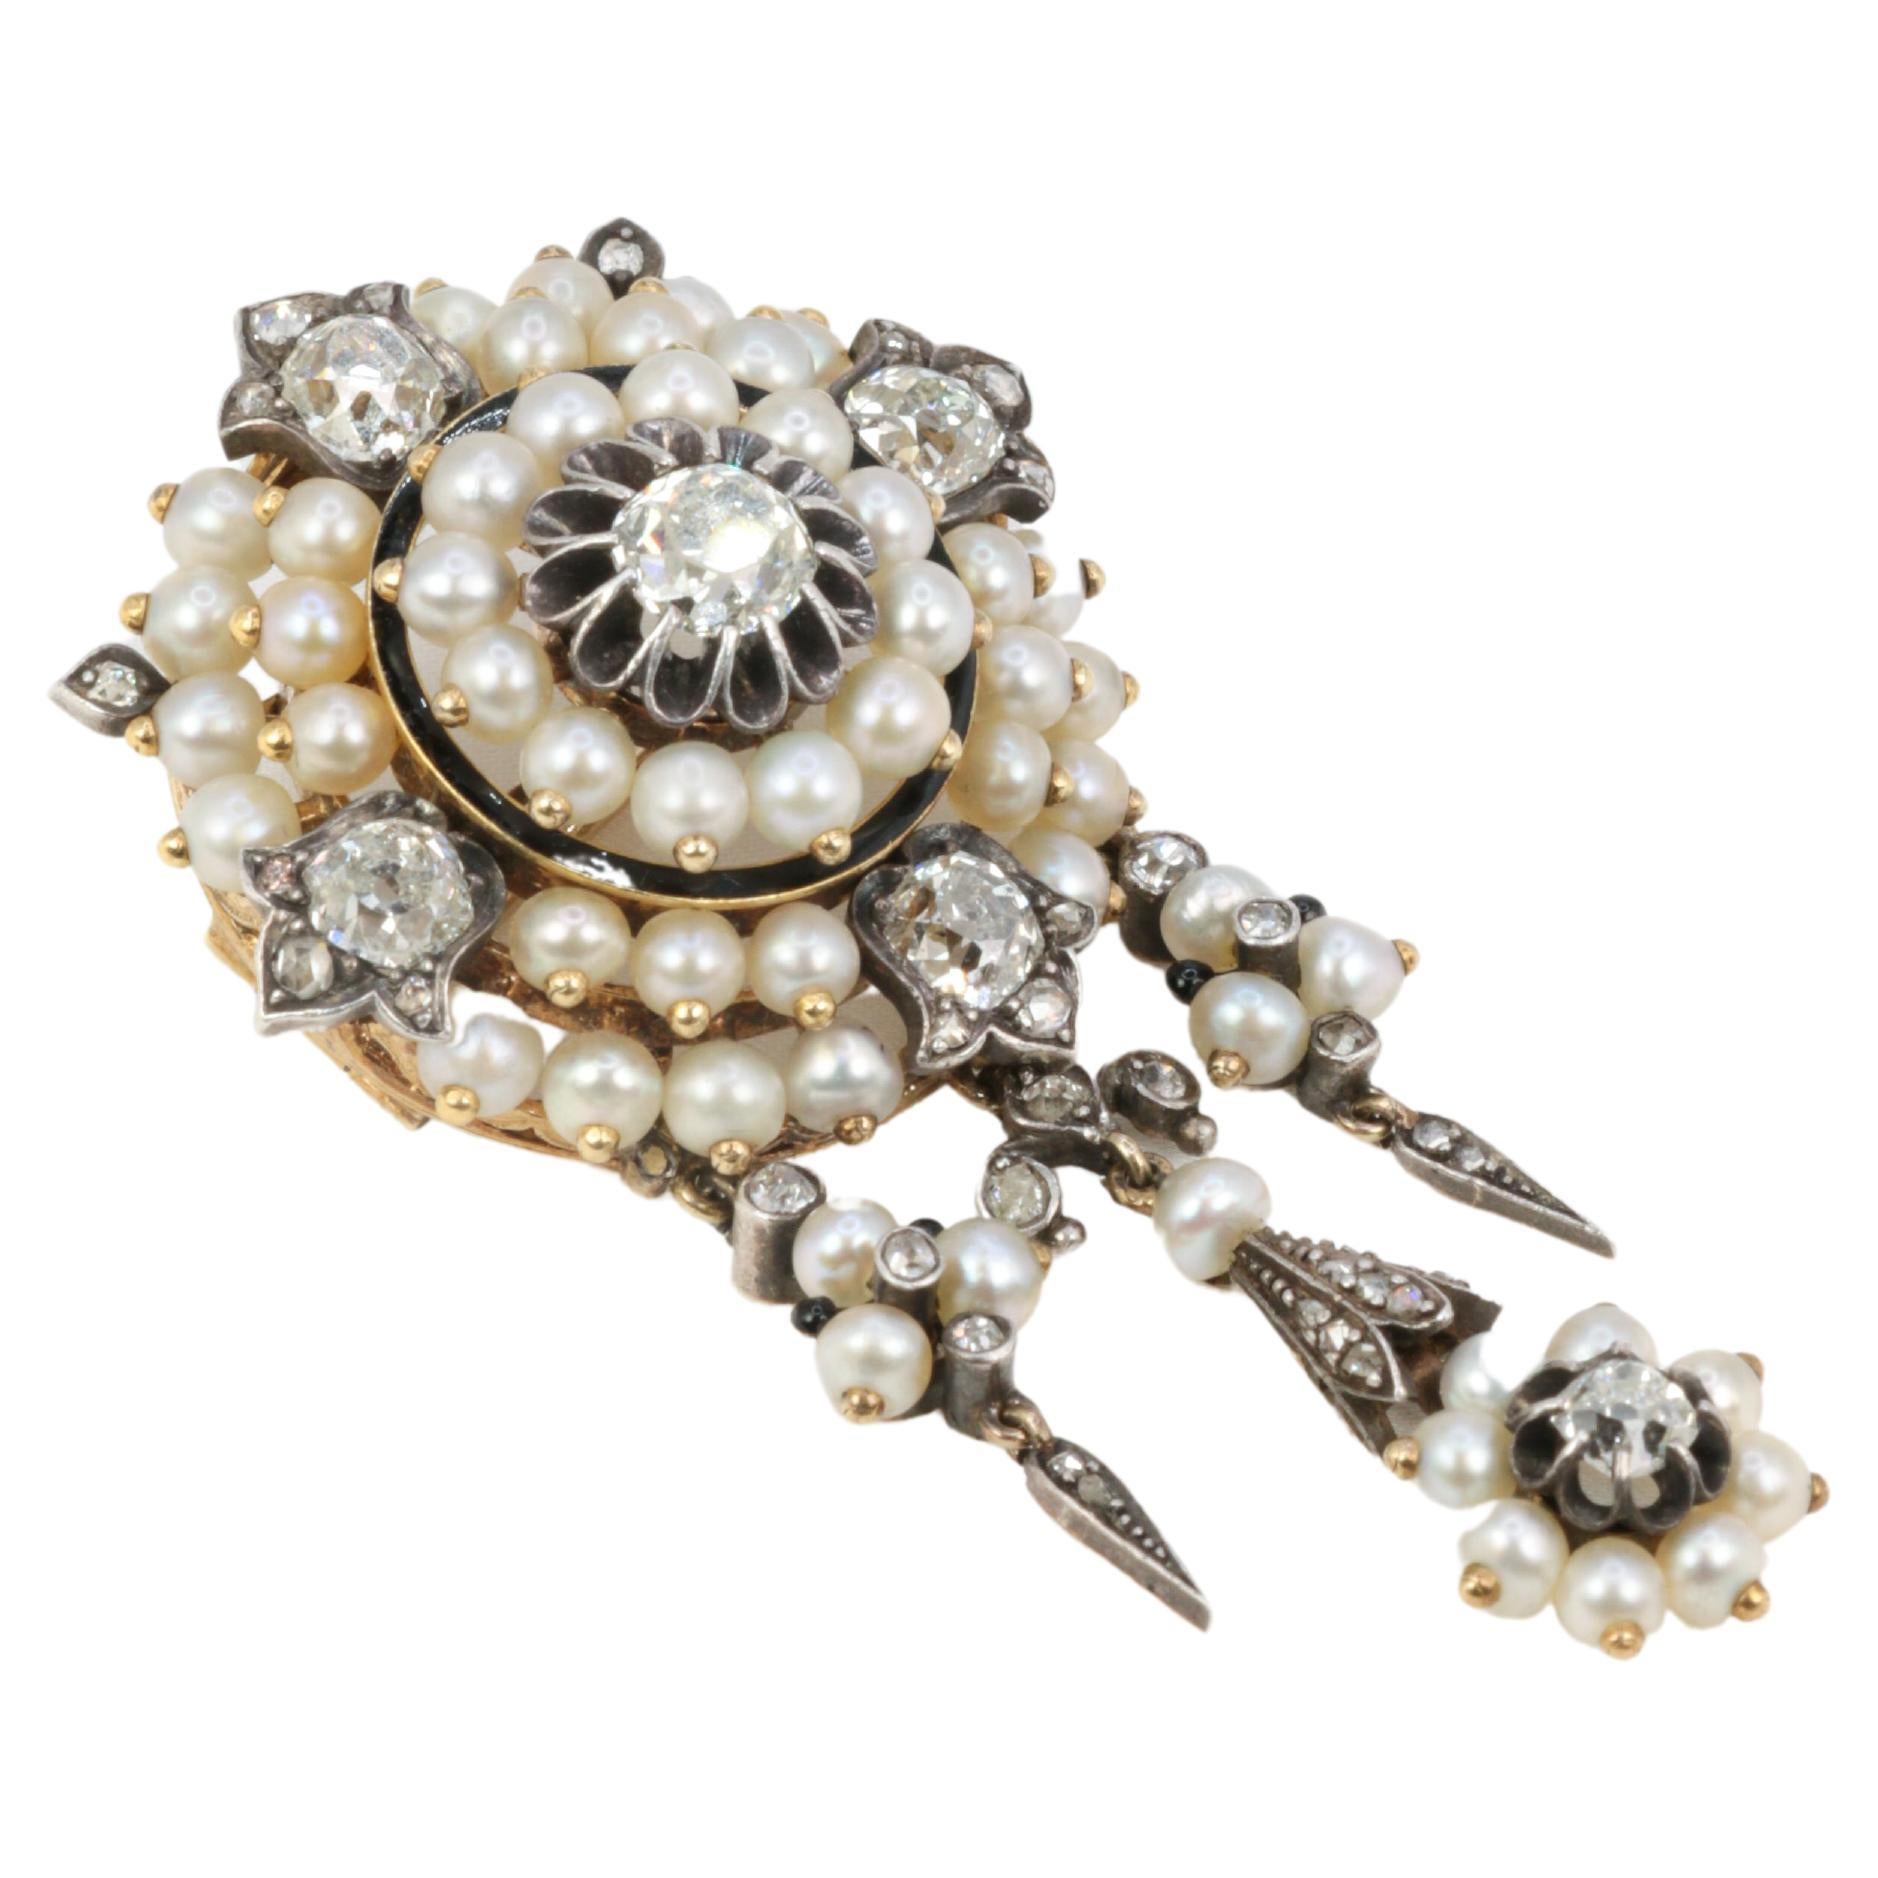 Gold Antique Brooch / Corsage Front with Silver, Diamonds, Fine Pearls and Ename